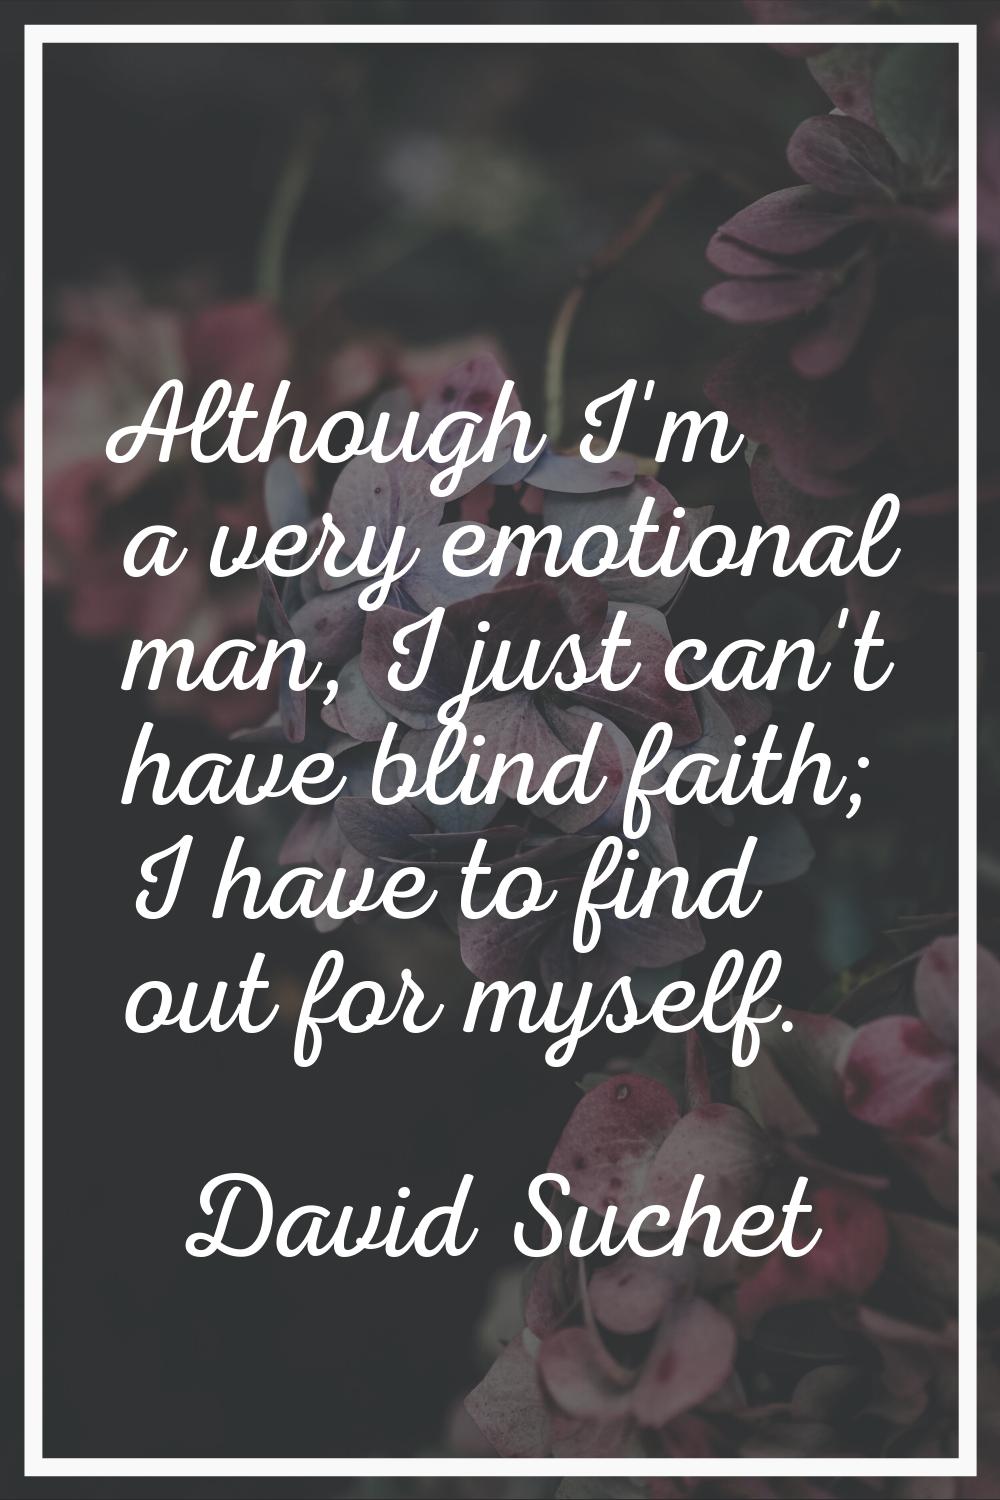 Although I'm a very emotional man, I just can't have blind faith; I have to find out for myself.